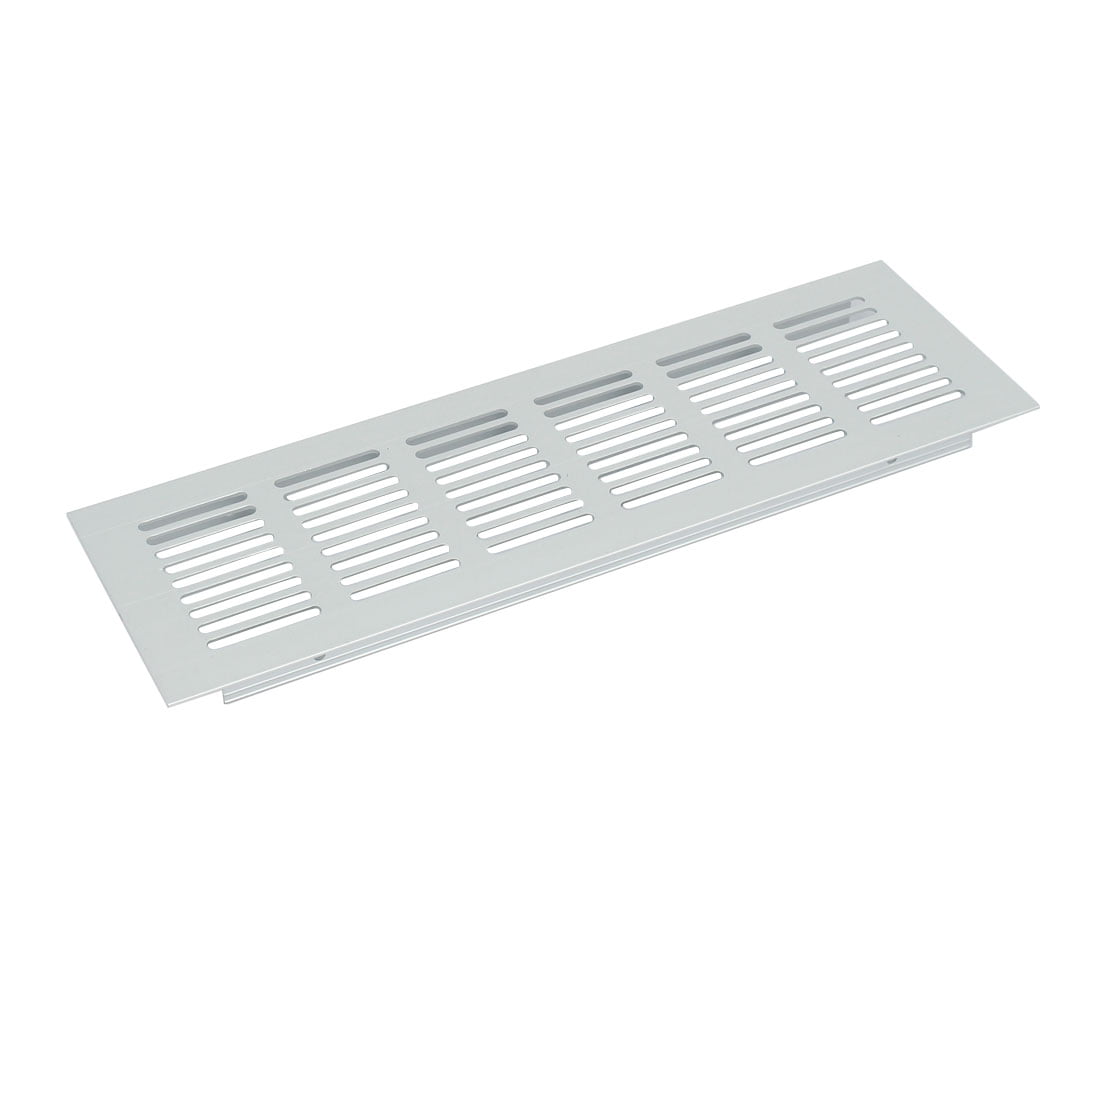 Metal Black Air Vent Grille 165mm x 165mm with Fly Screen Ventilation Cover 